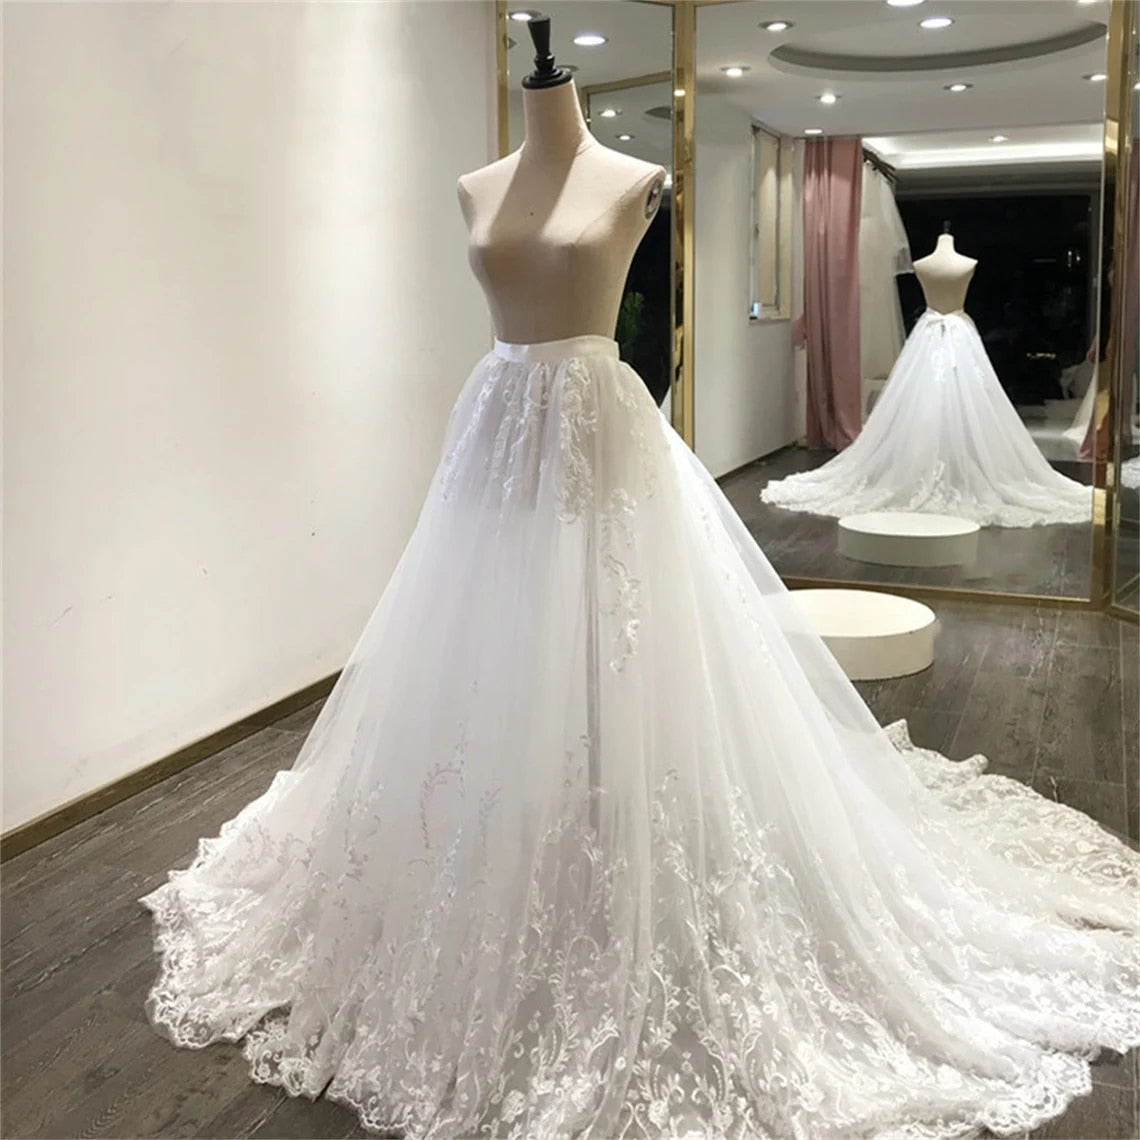 Luxury Lace Appliques Wedding Detachable Skirt Removable Train for Dresses Bridal Overskirt